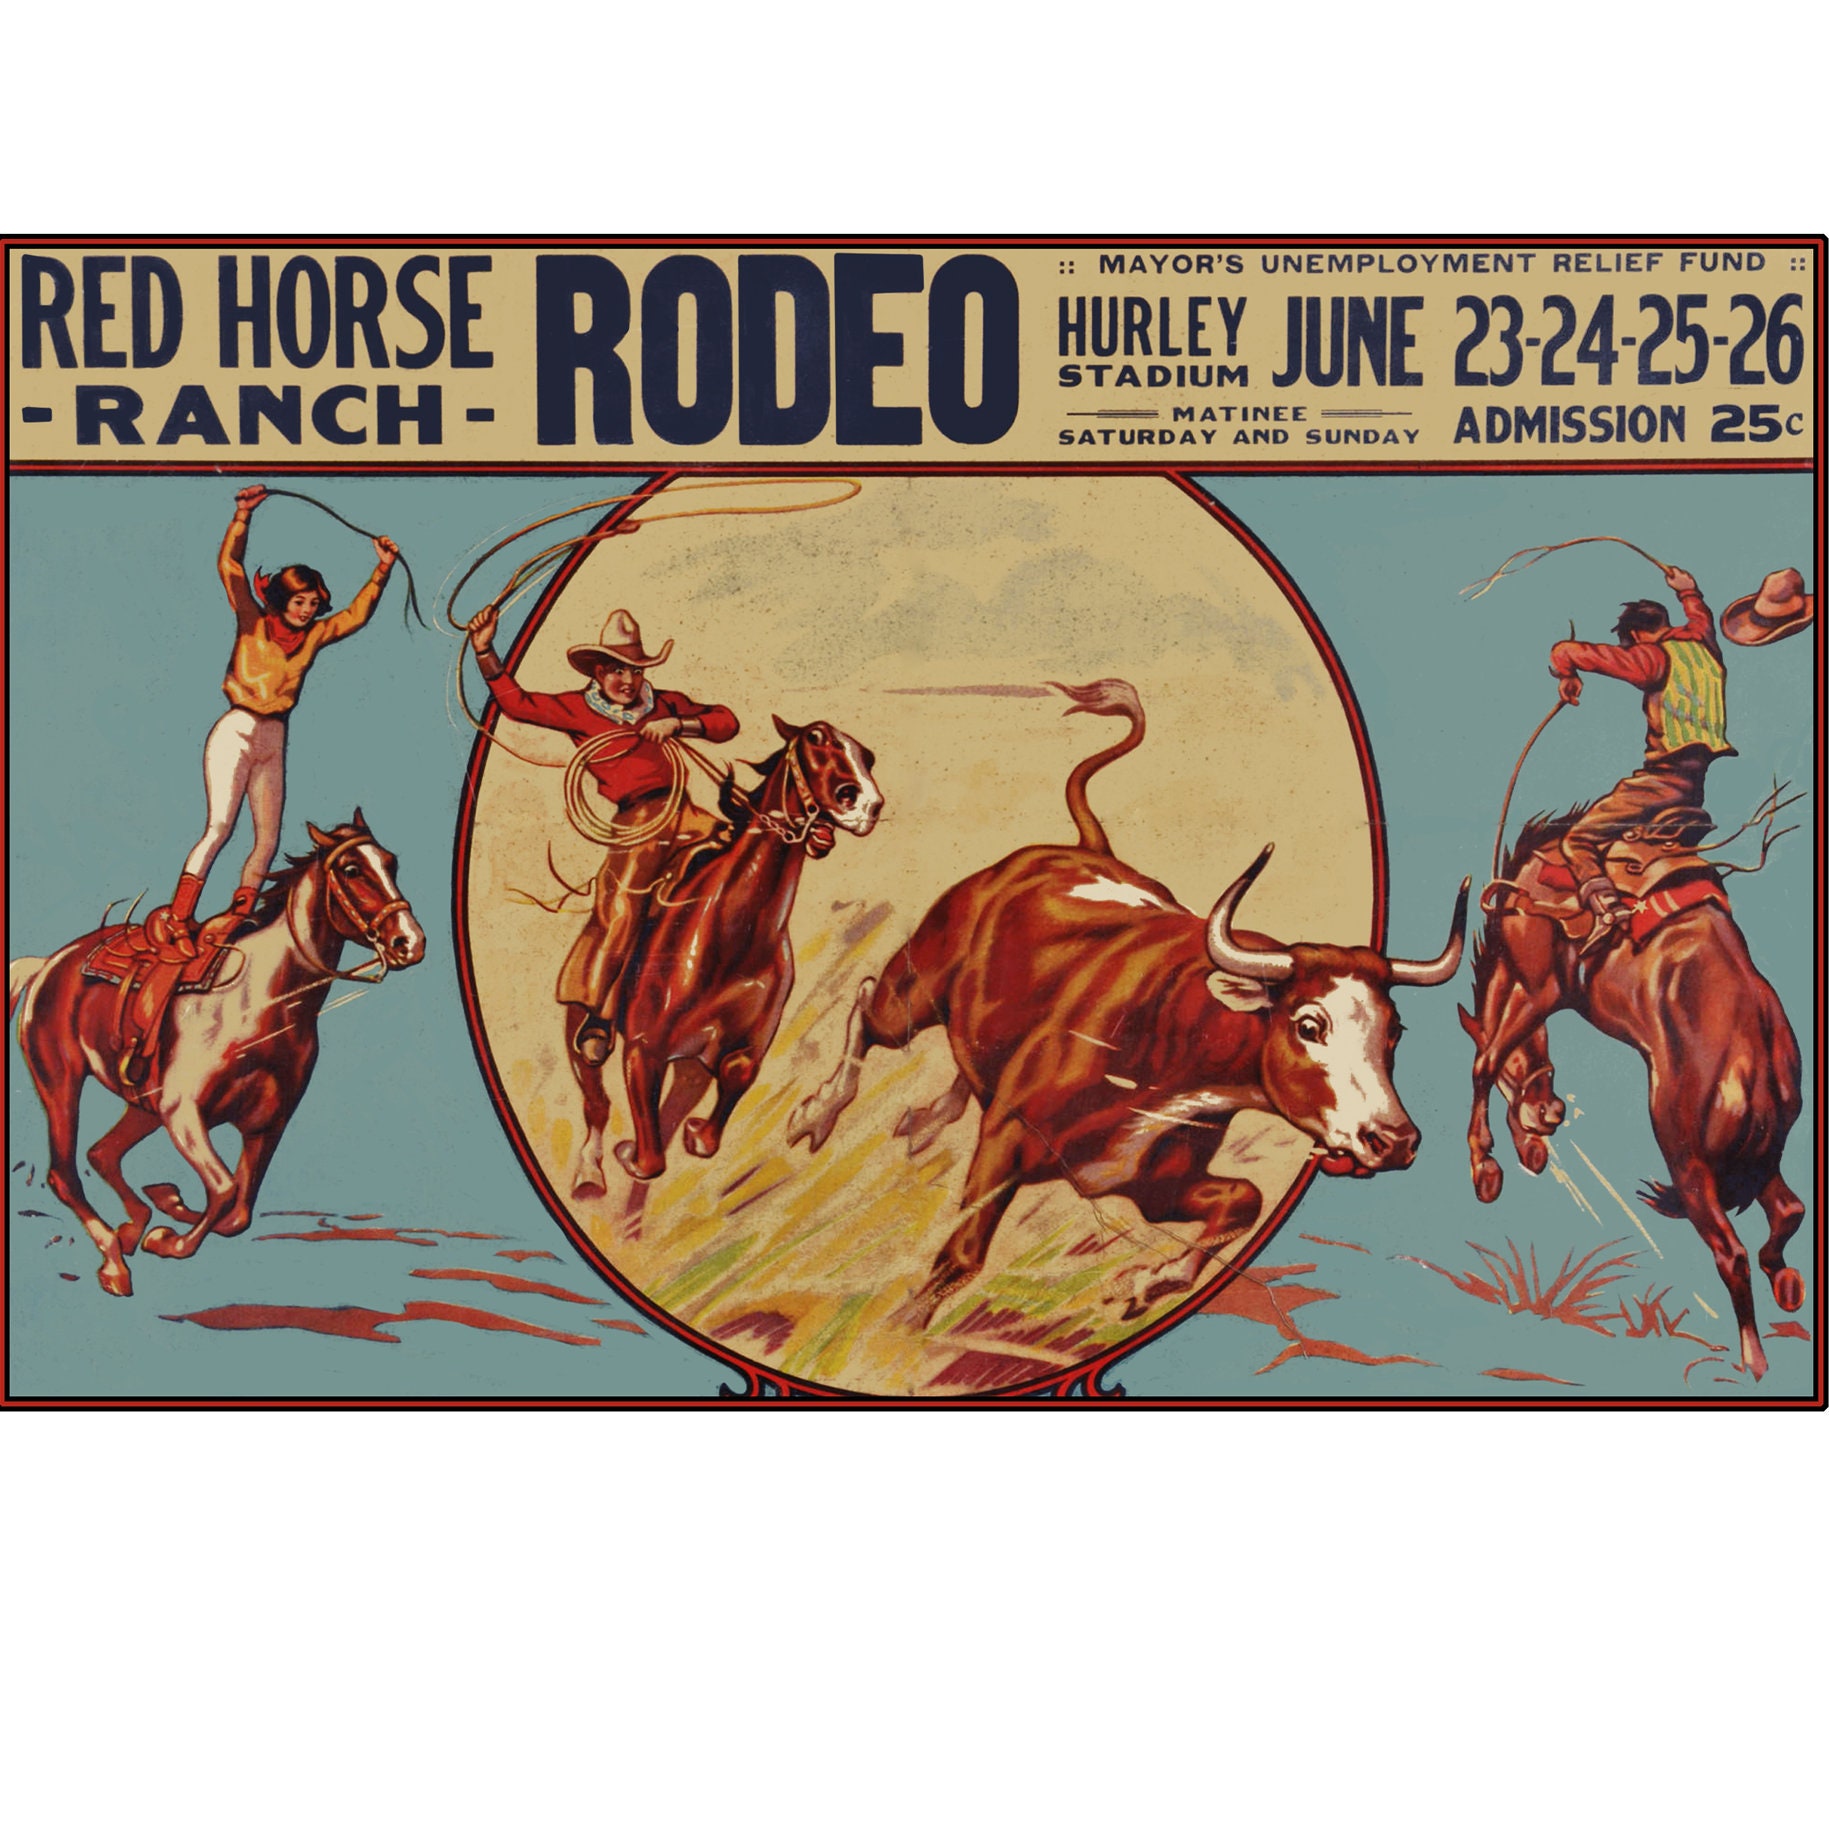 Vintage Rodeo Poster Red Horse Ranch | Etsy